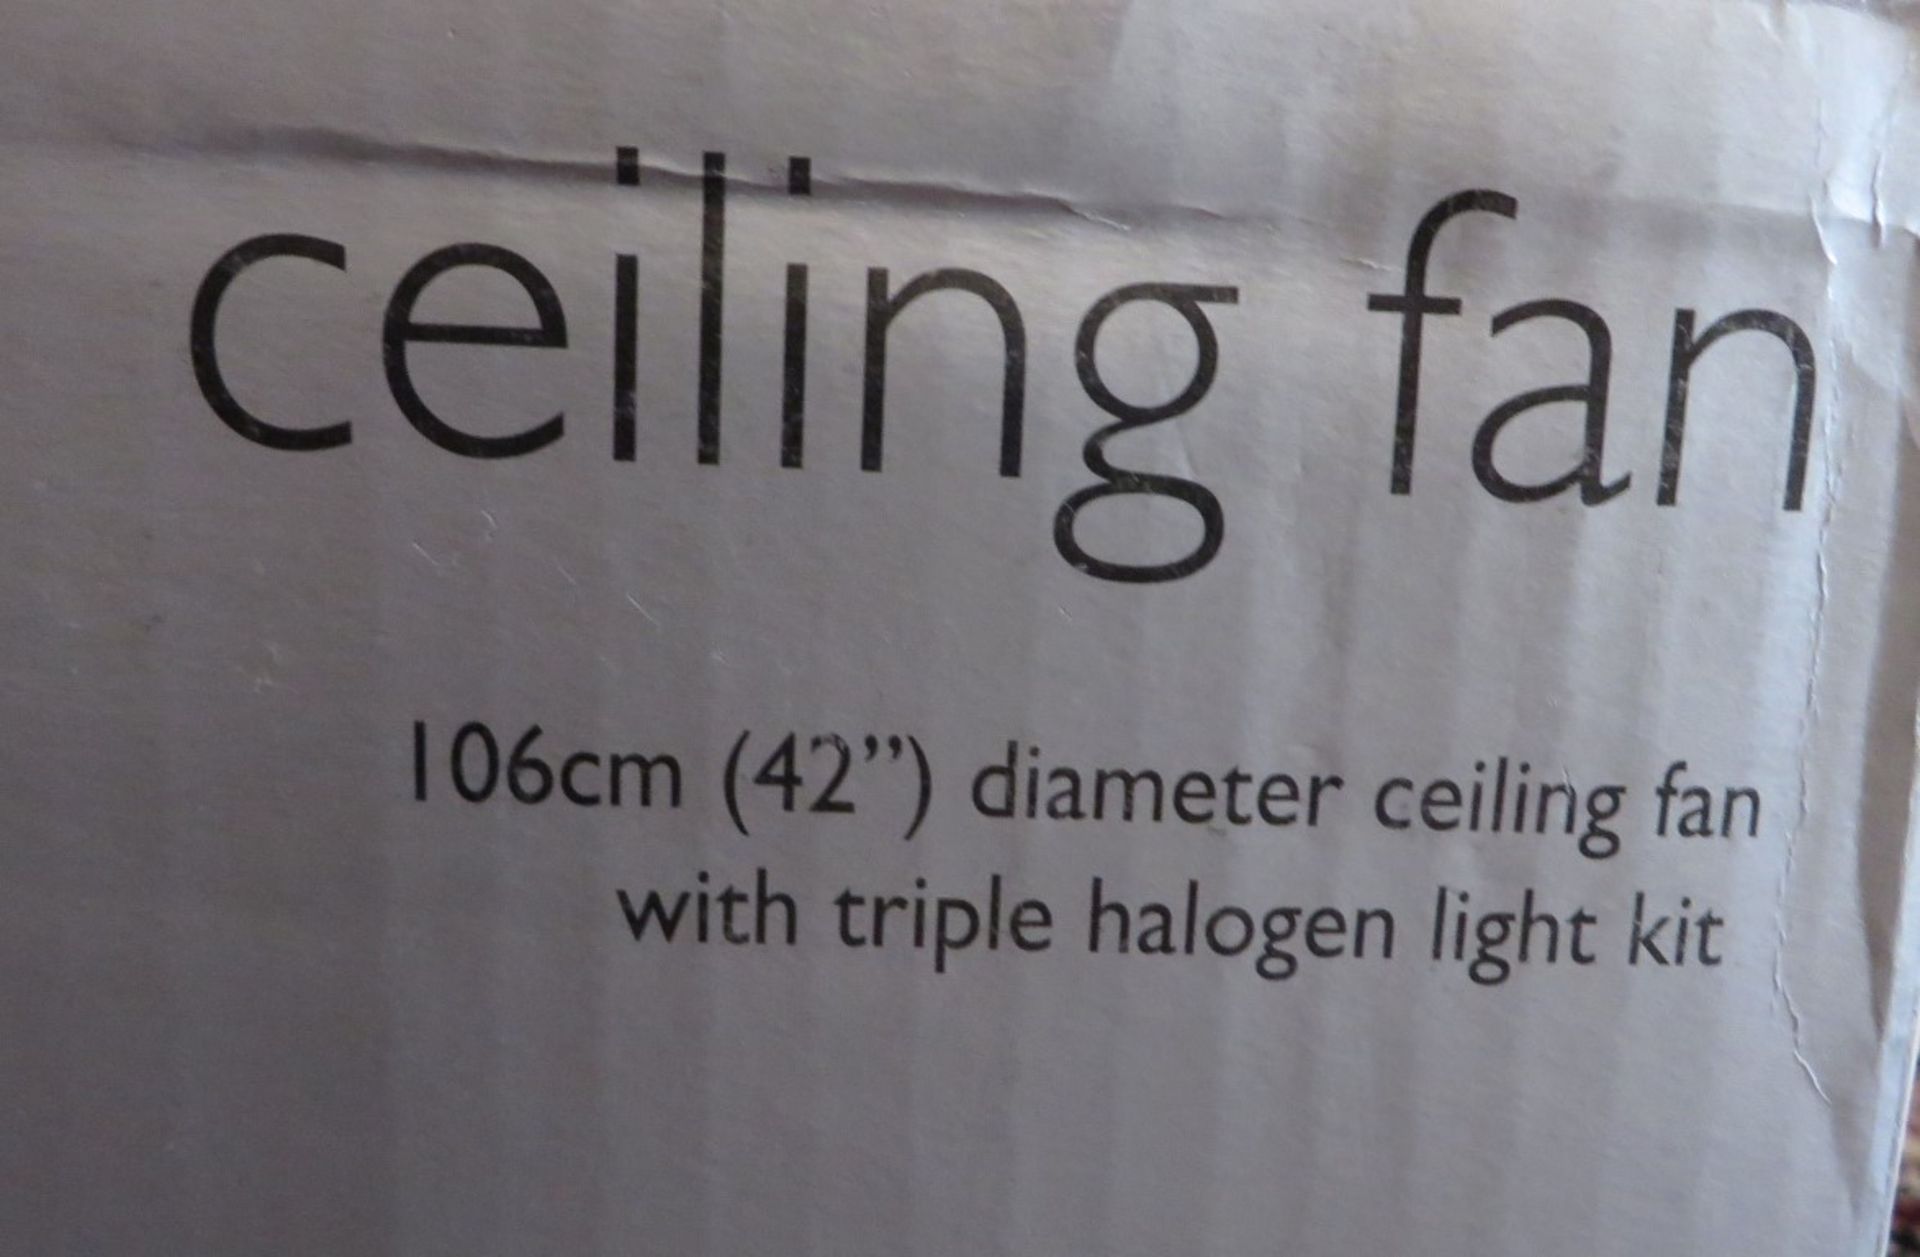 1 x Cyclone Ceiling Fan With Triple Halogen Light Kit - 106cm/42" - Unsued, In Original Box - Ref: - Image 3 of 5